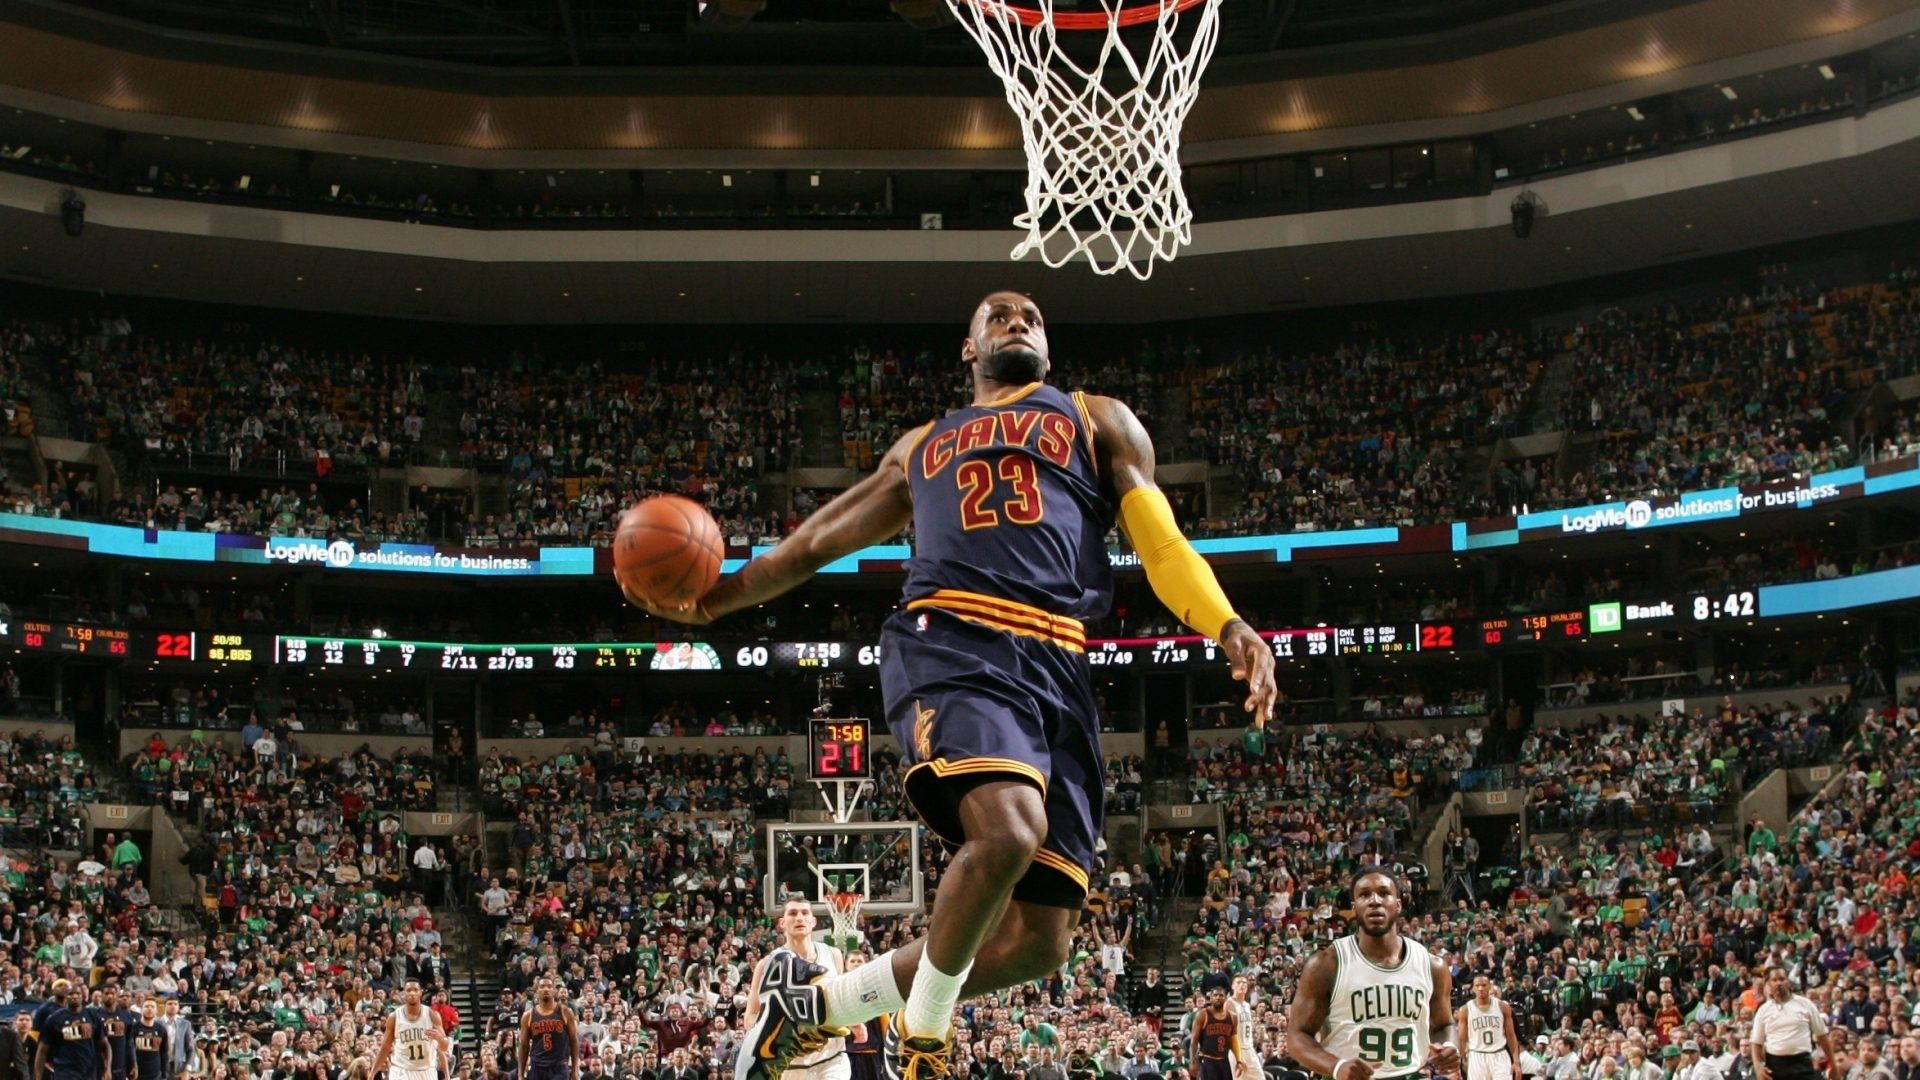 1920x1080 LeBron James Dunking Wallpapers Top Free LeBron James Dunking Backgrounds